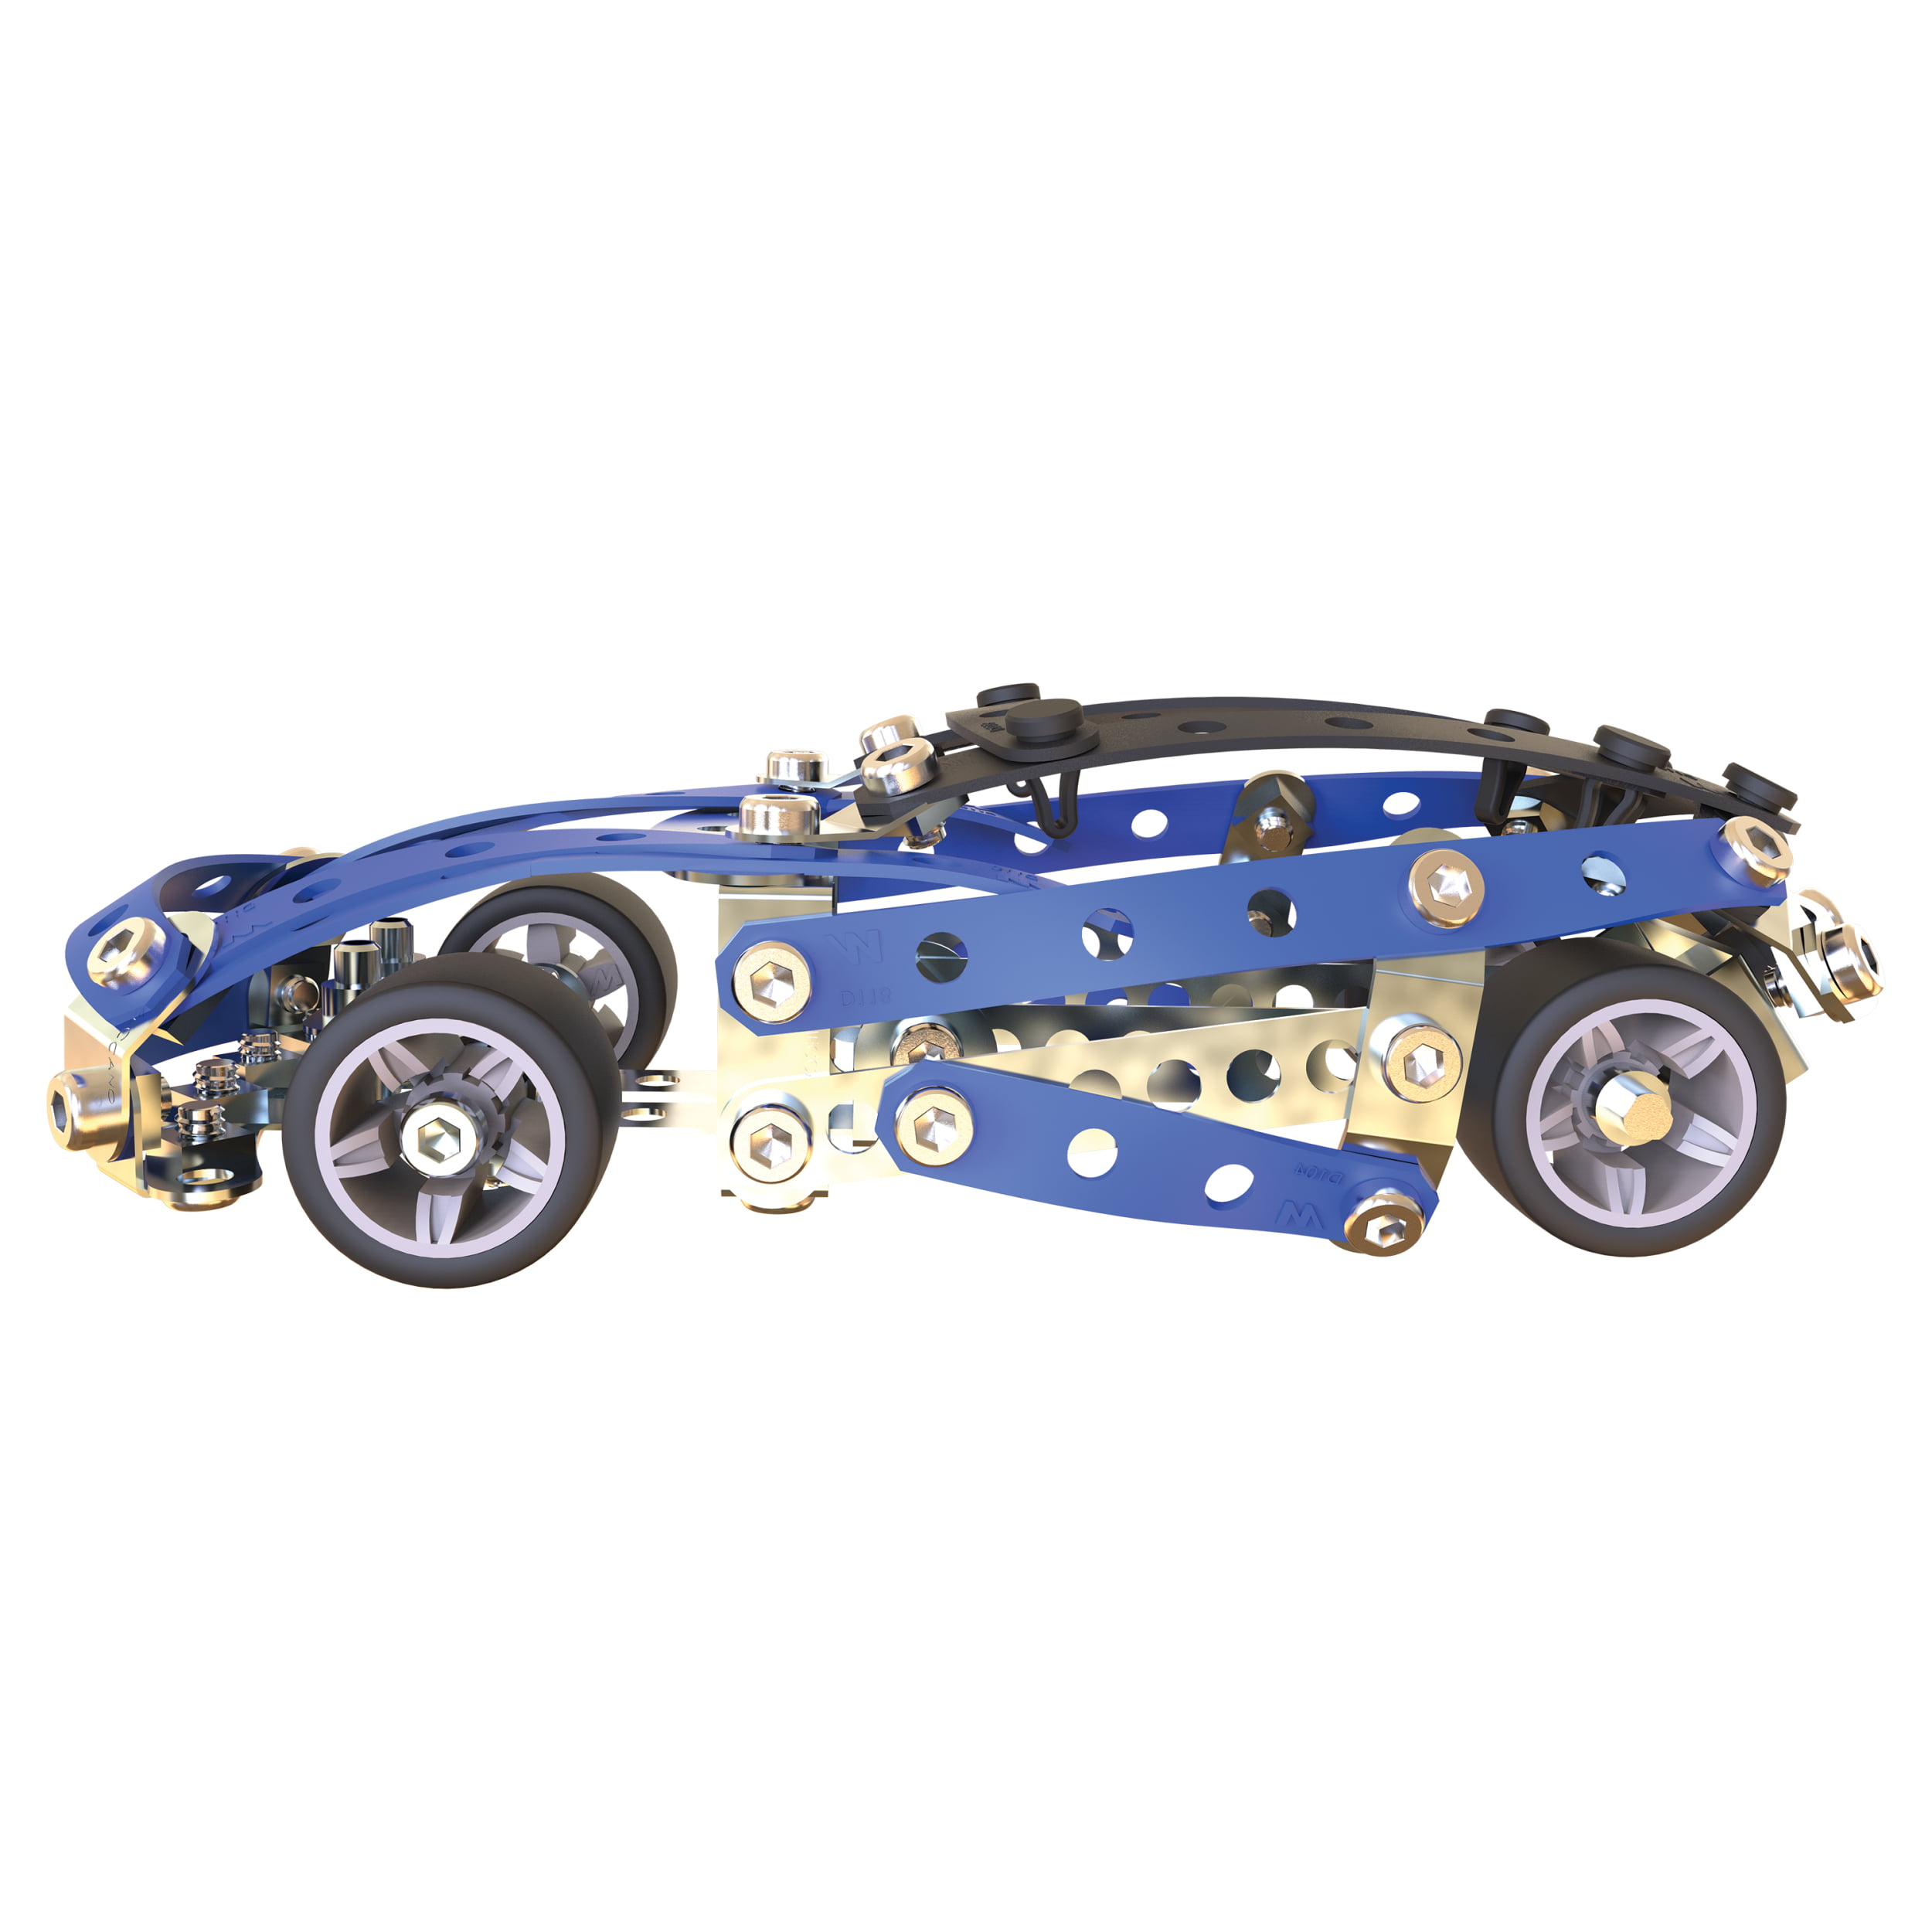 Meccano by Erector, 5 in 1 Model Building Set - Motorcycles, STEM  Engineering Education Toy, 174 Pieces, For Ages 8 and up